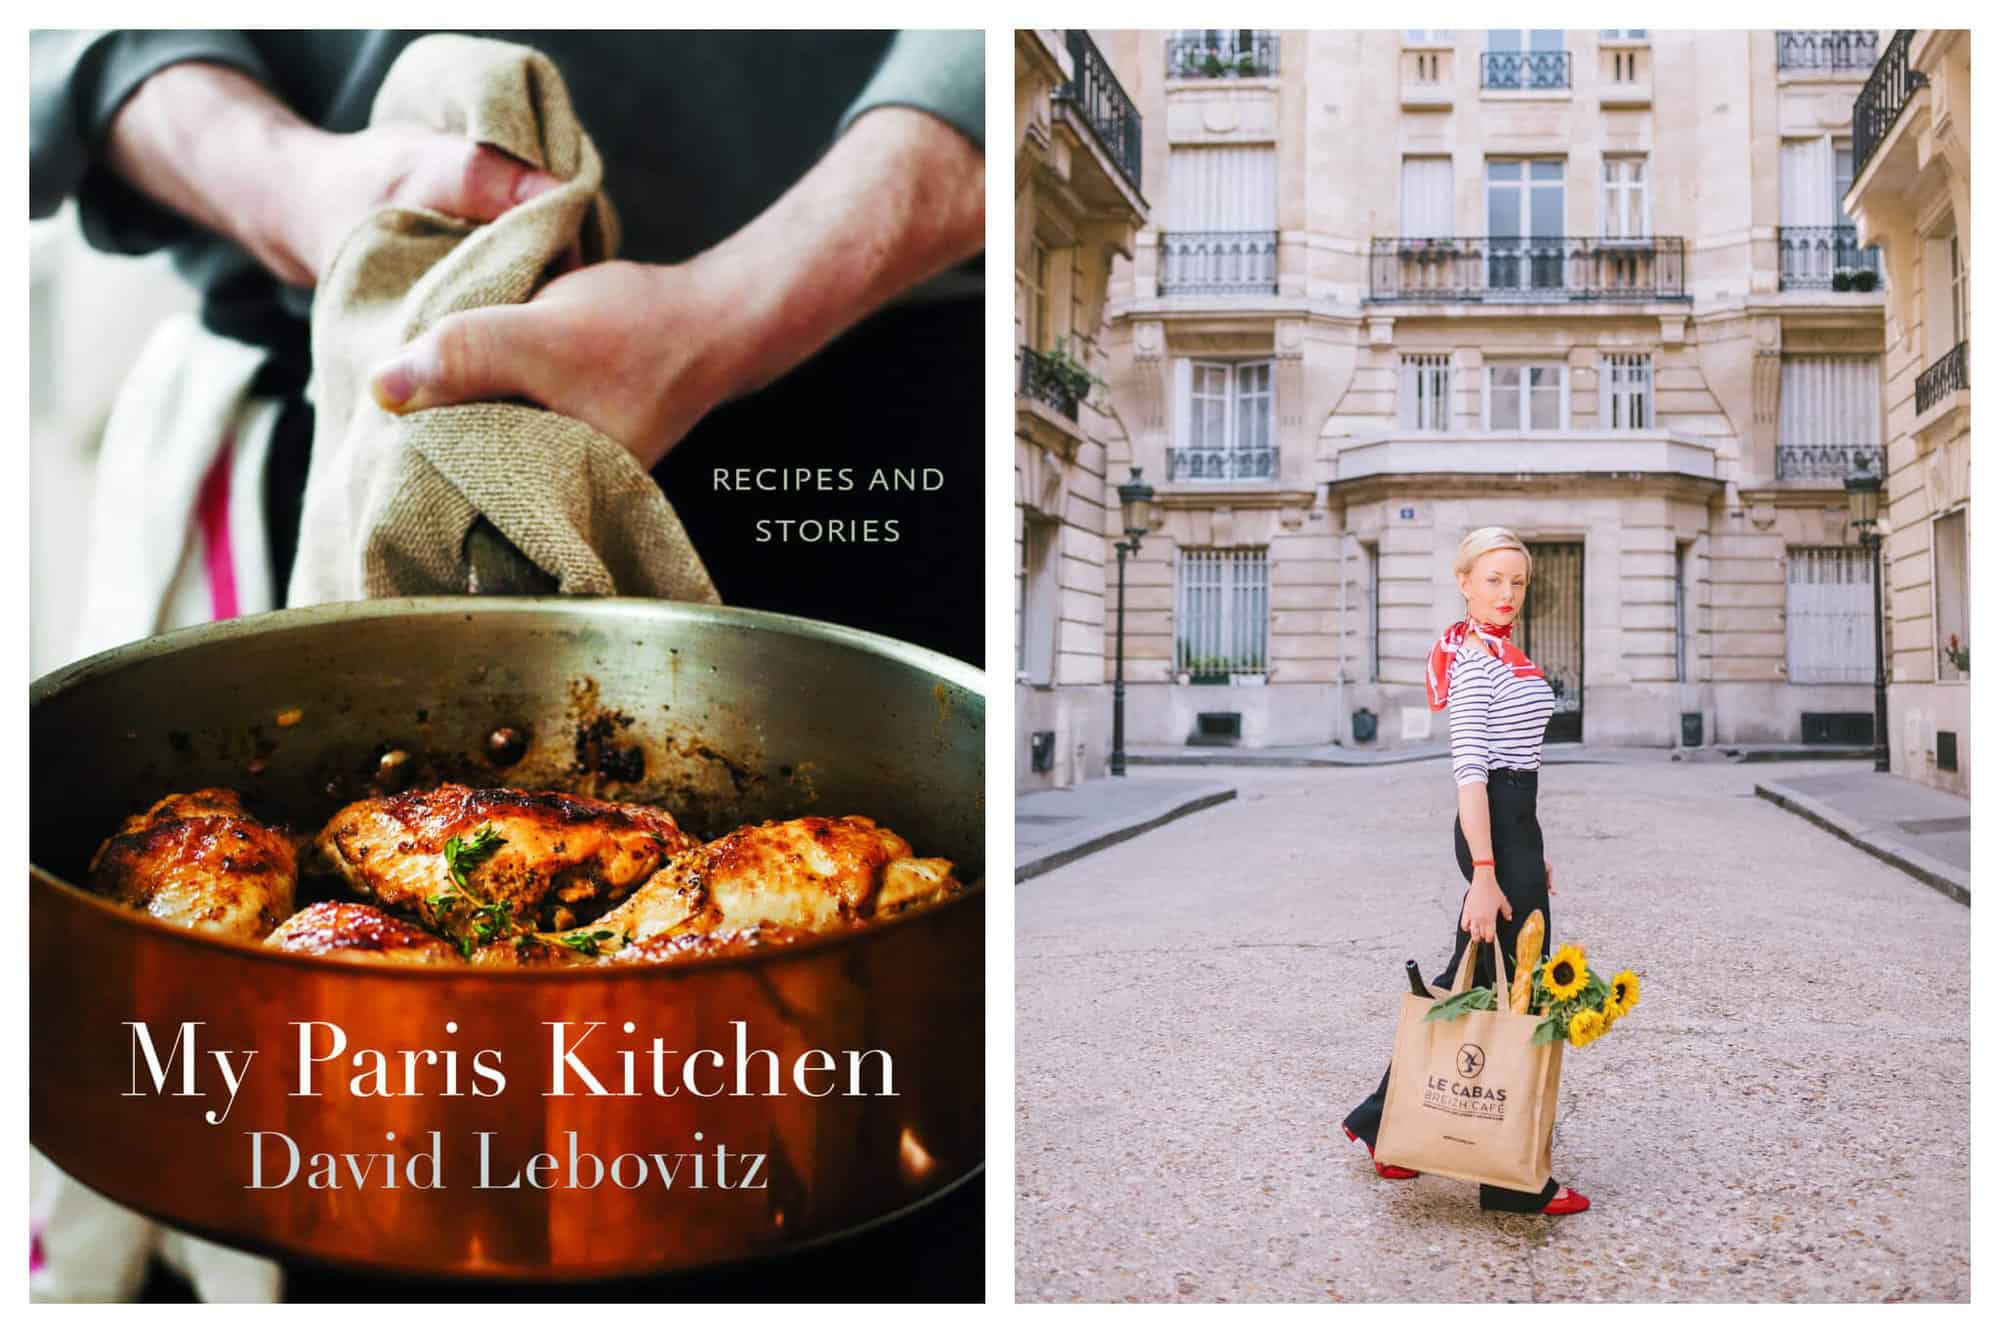 Left: the front cover of David Lebovitz's book 'My Paris Kitchen'. Right: a blonde woman wearing a striped top and a scarf around her neck on a Paris street carrying a bag with a baguette and sunflowers inside.